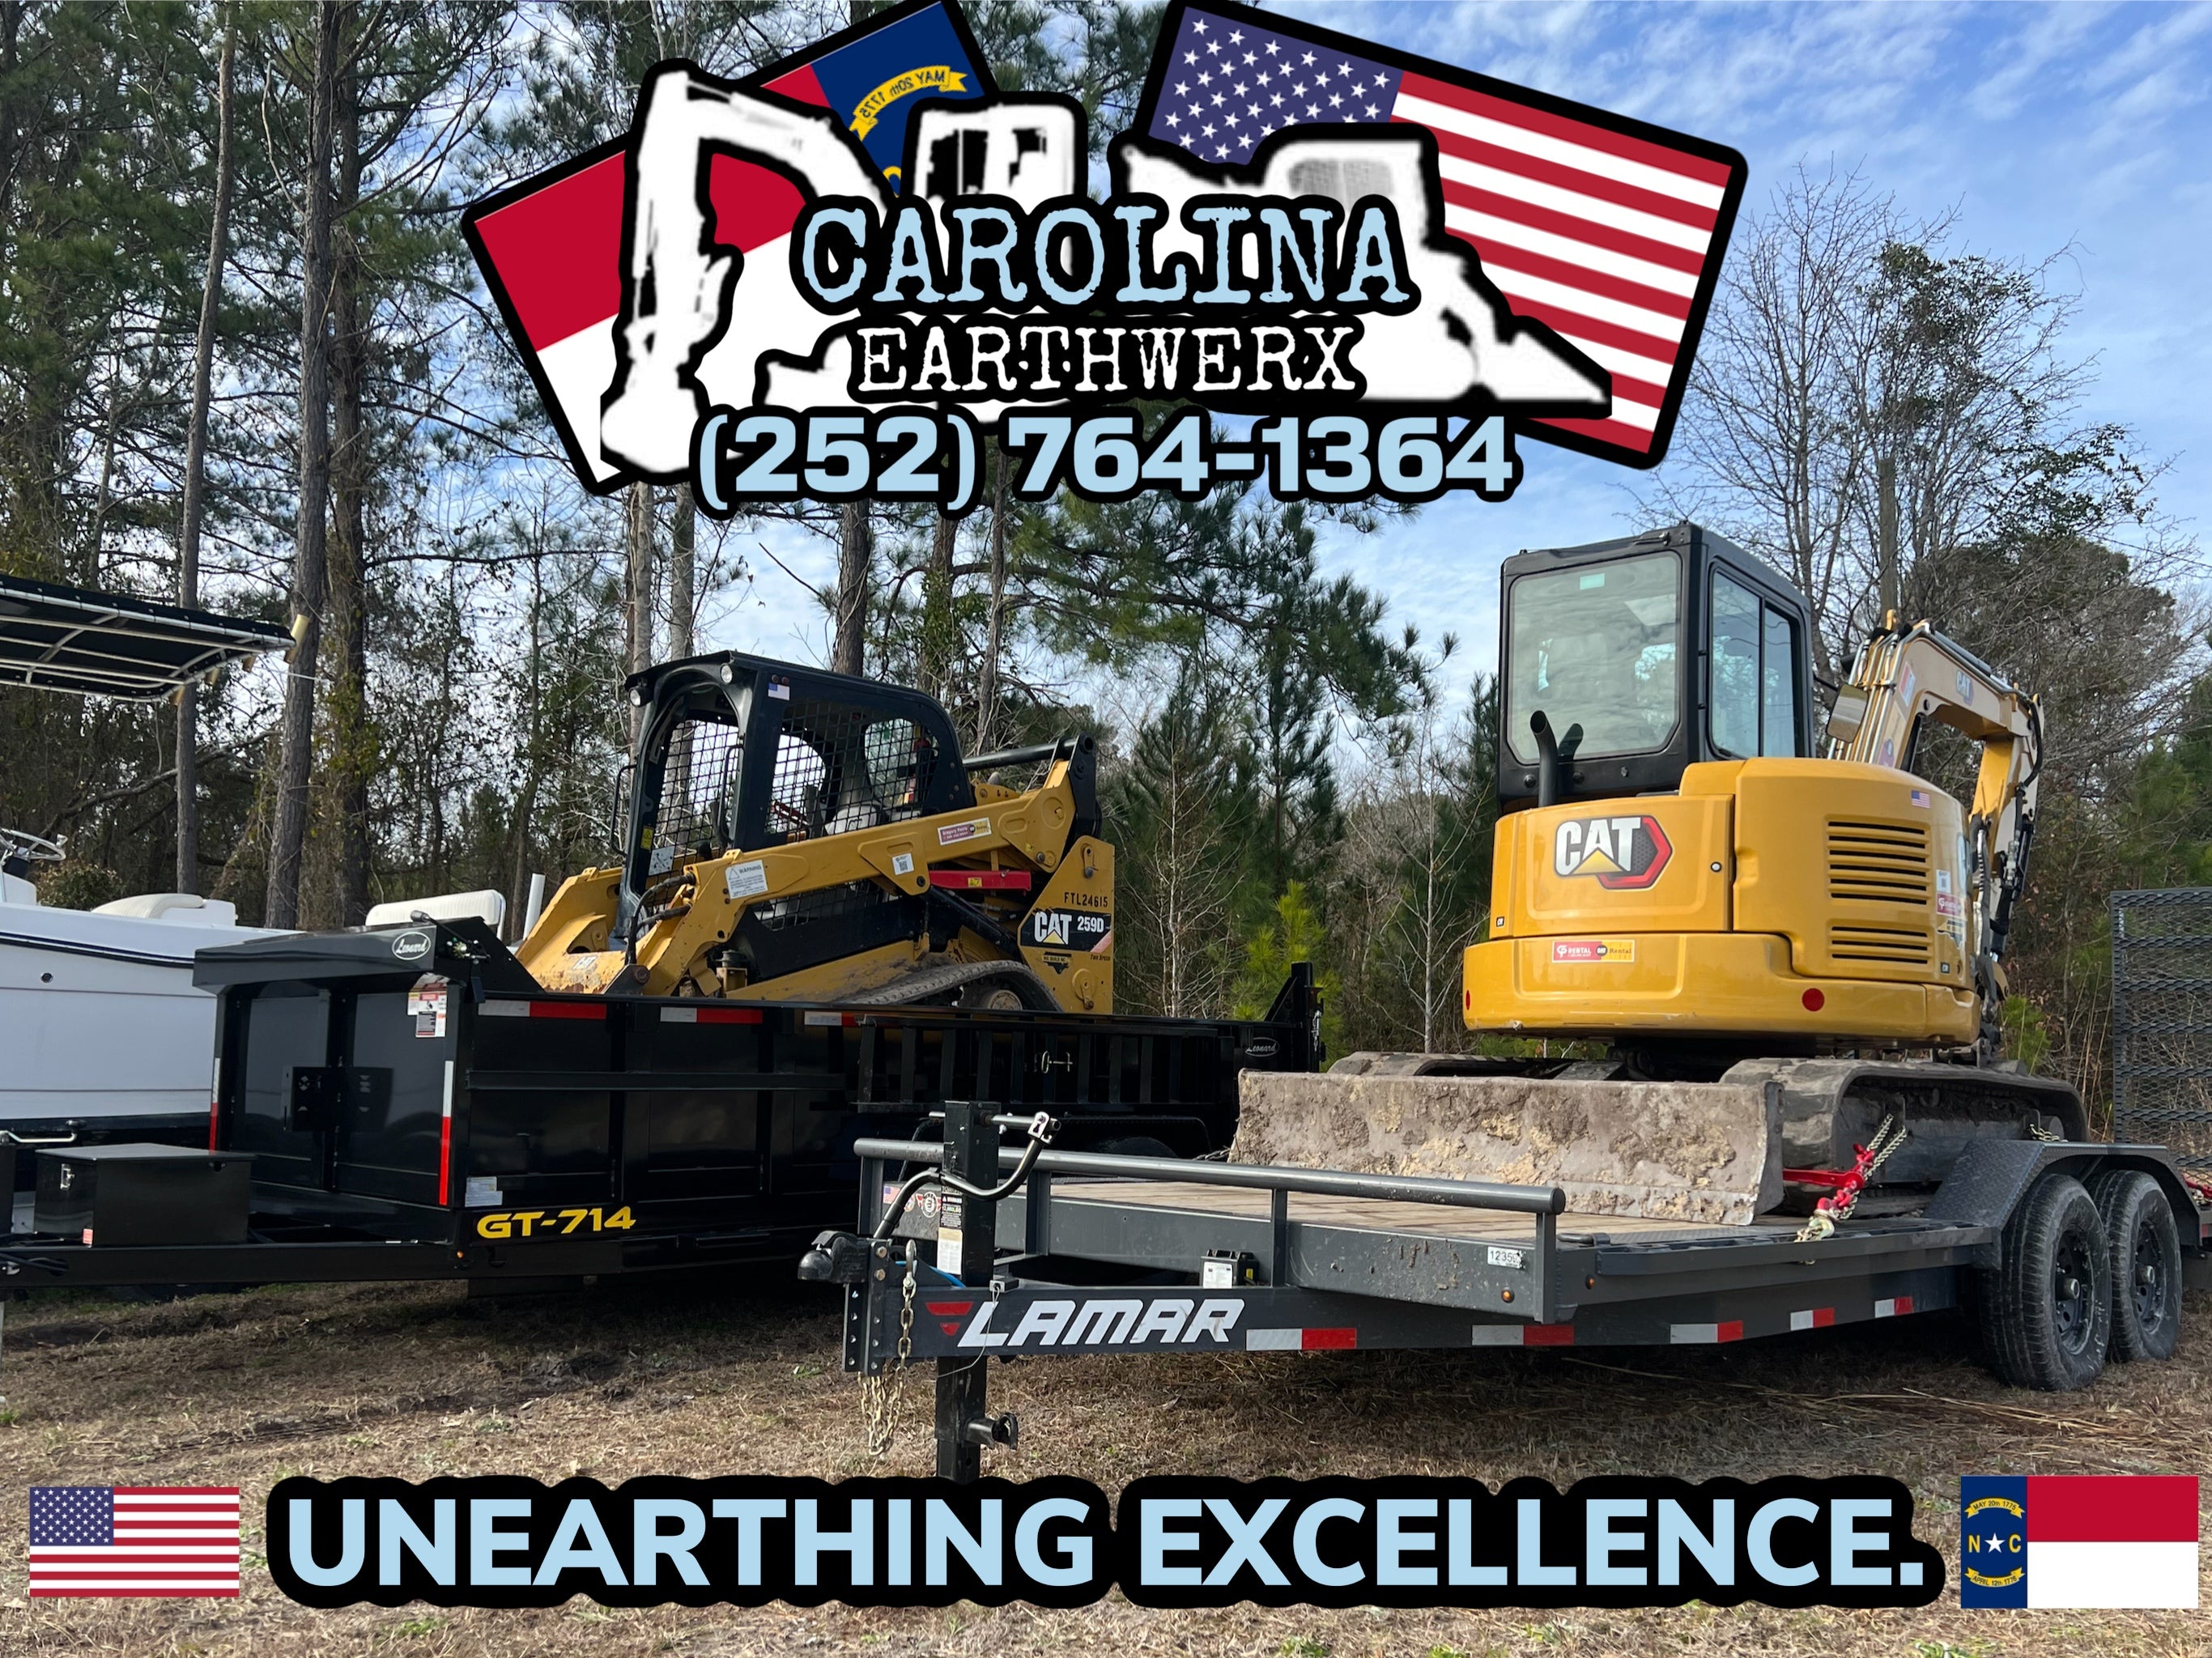 WELCOME TO CAROLINA EARTHWERX, LEADERS IN LAND MANAGEMENT.